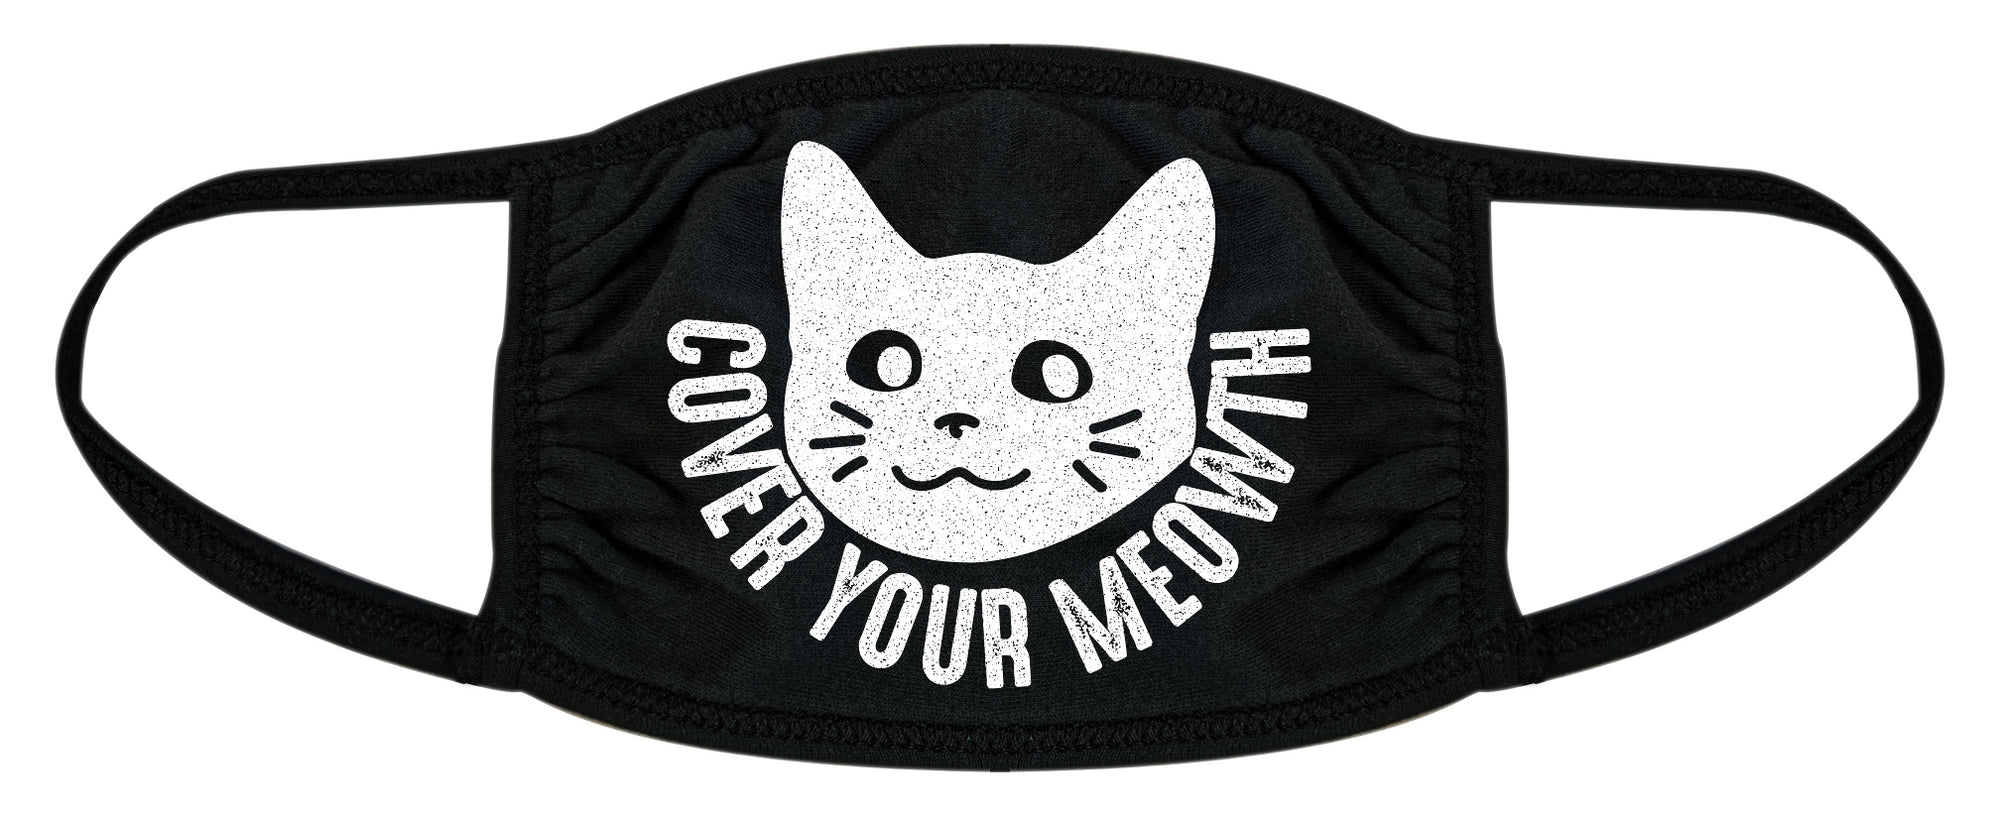 Funny Black Cover Your Meowth Face Mask Nerdy Cat Tee